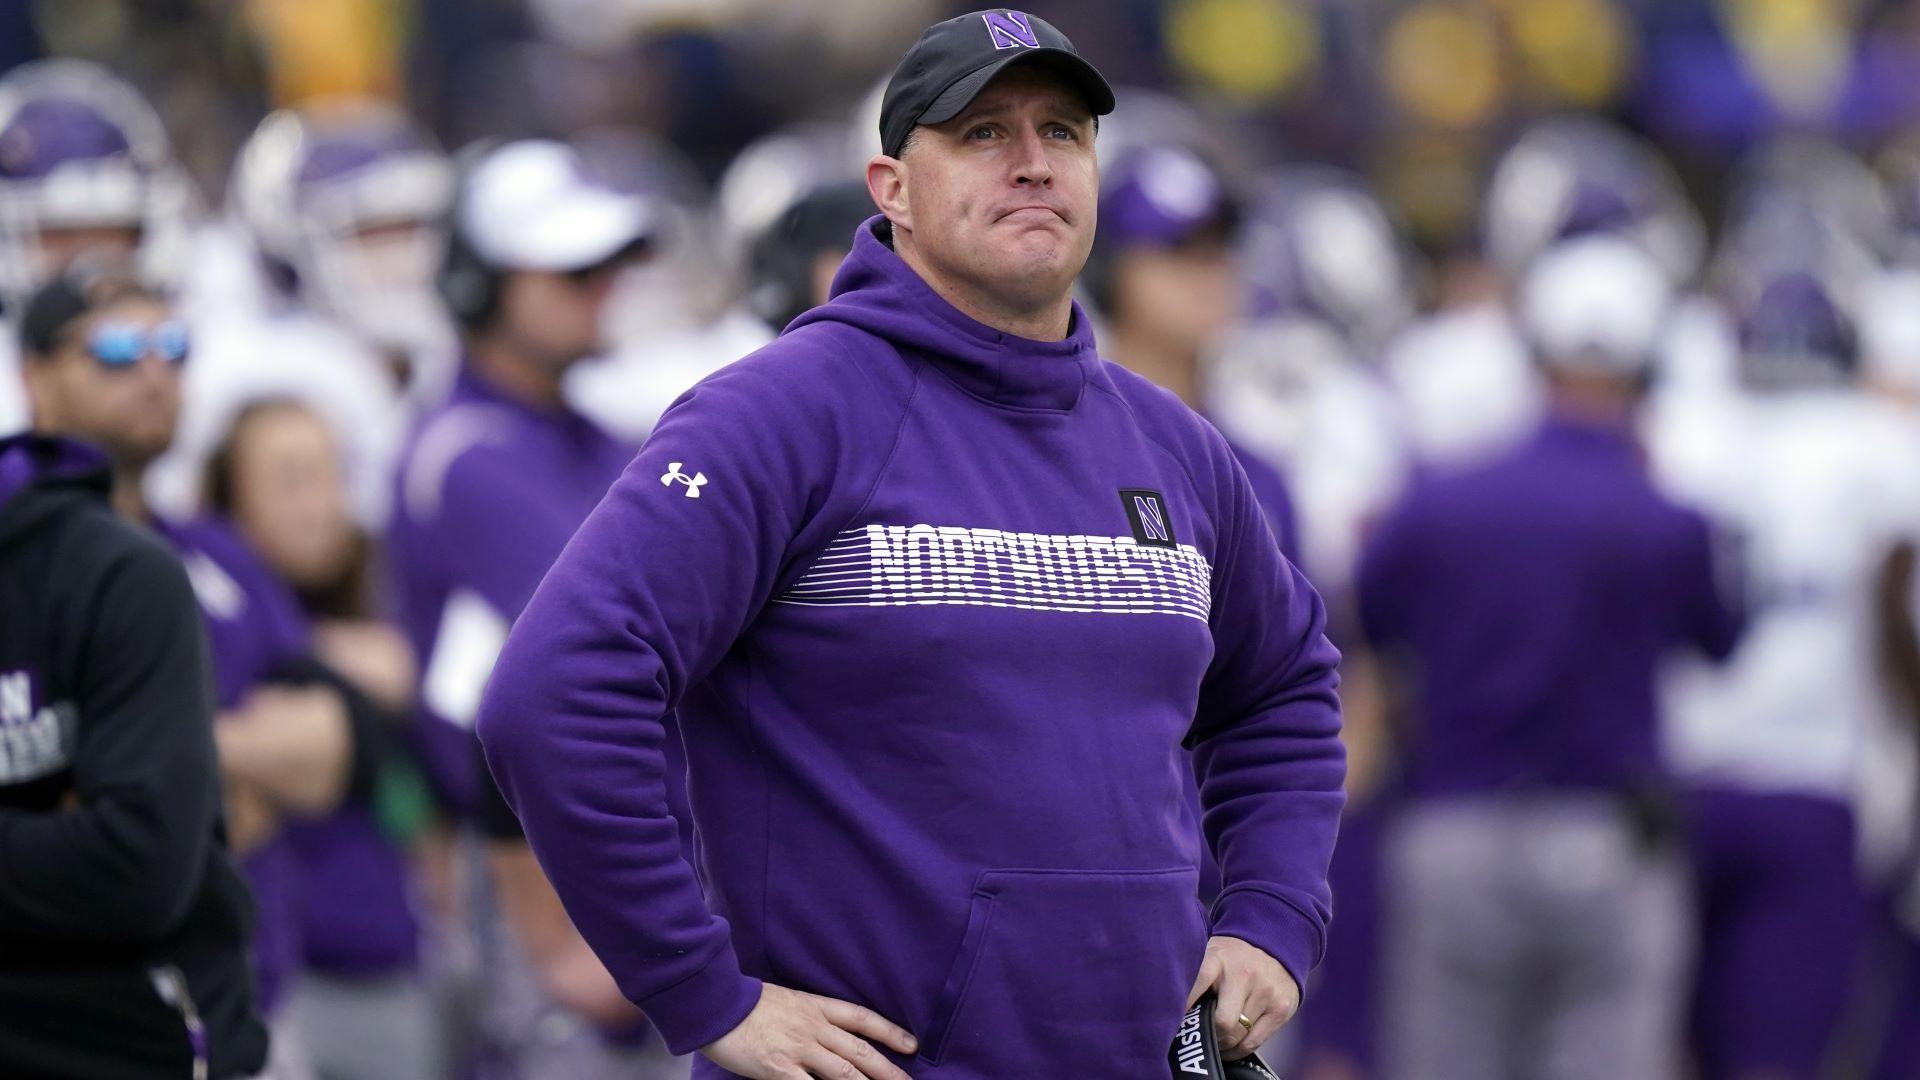 Northwestern head coach Pat Fitzgerald stands on the sideline during the first half of an NCAA college football game against Michigan, Oct. 23, 2021, in Ann Arbor, Mich. (AP Photo/Carlos Osorio, File)